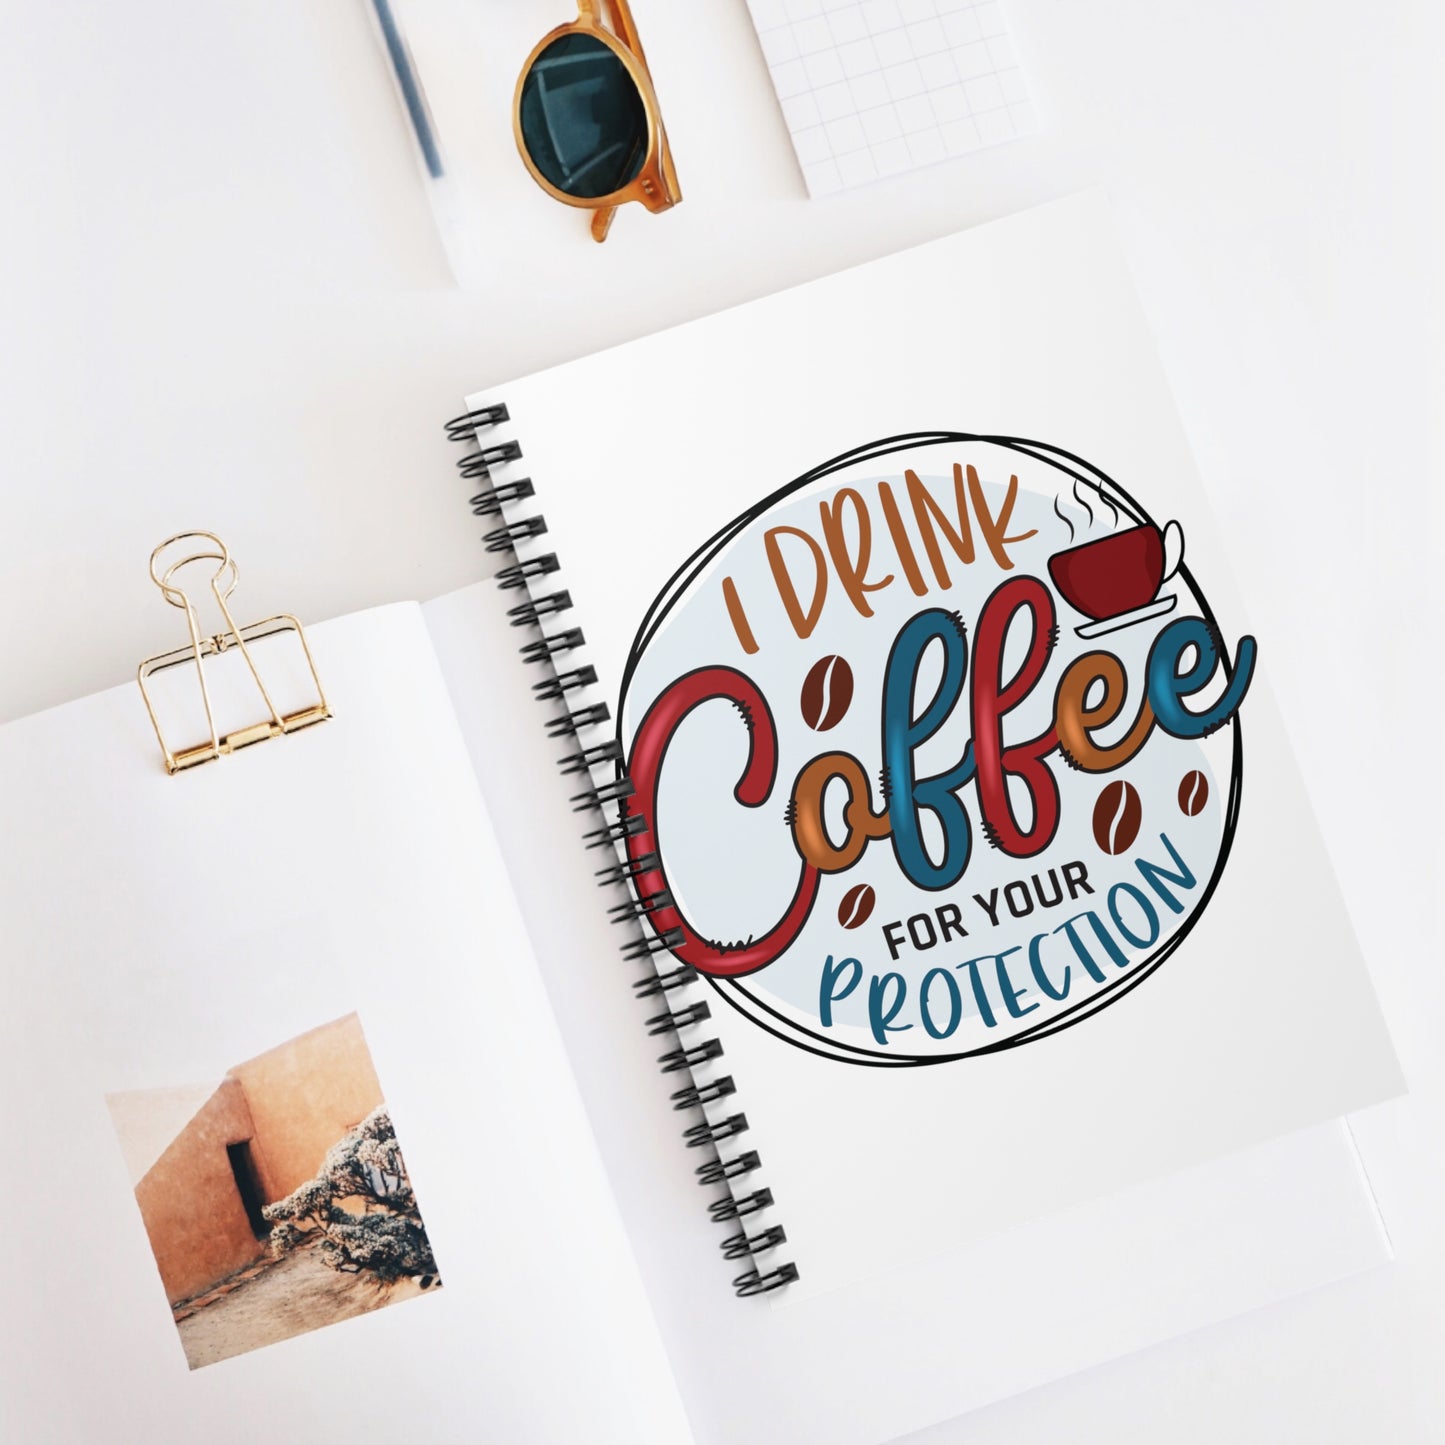 I Drink Coffee: Spiral Notebook - Log Books - Journals - Diaries - and More Custom Printed by TheGlassyLass